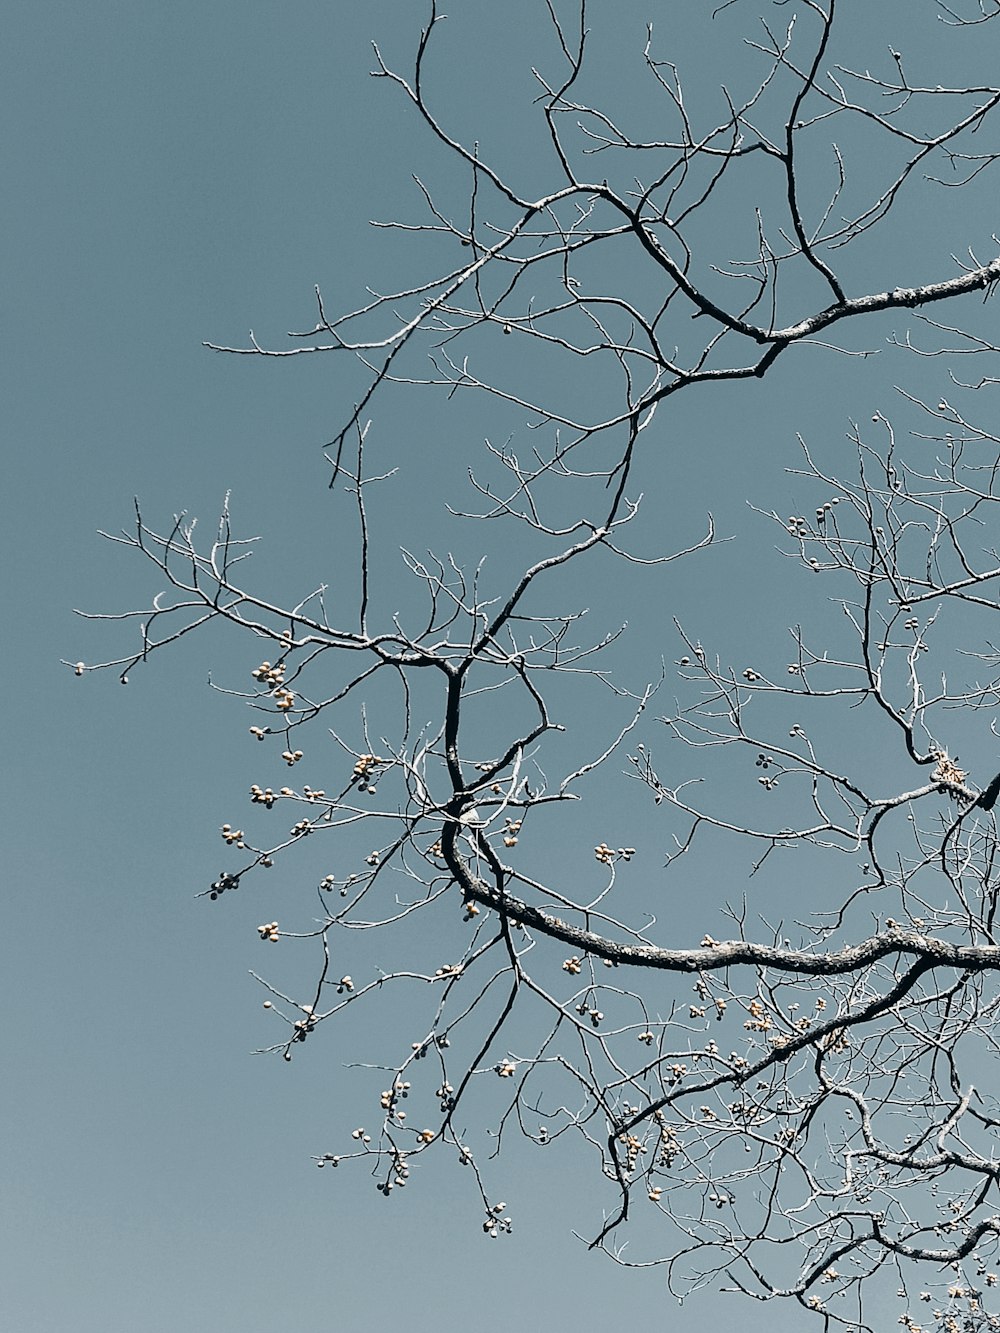 the branches of a tree with no leaves